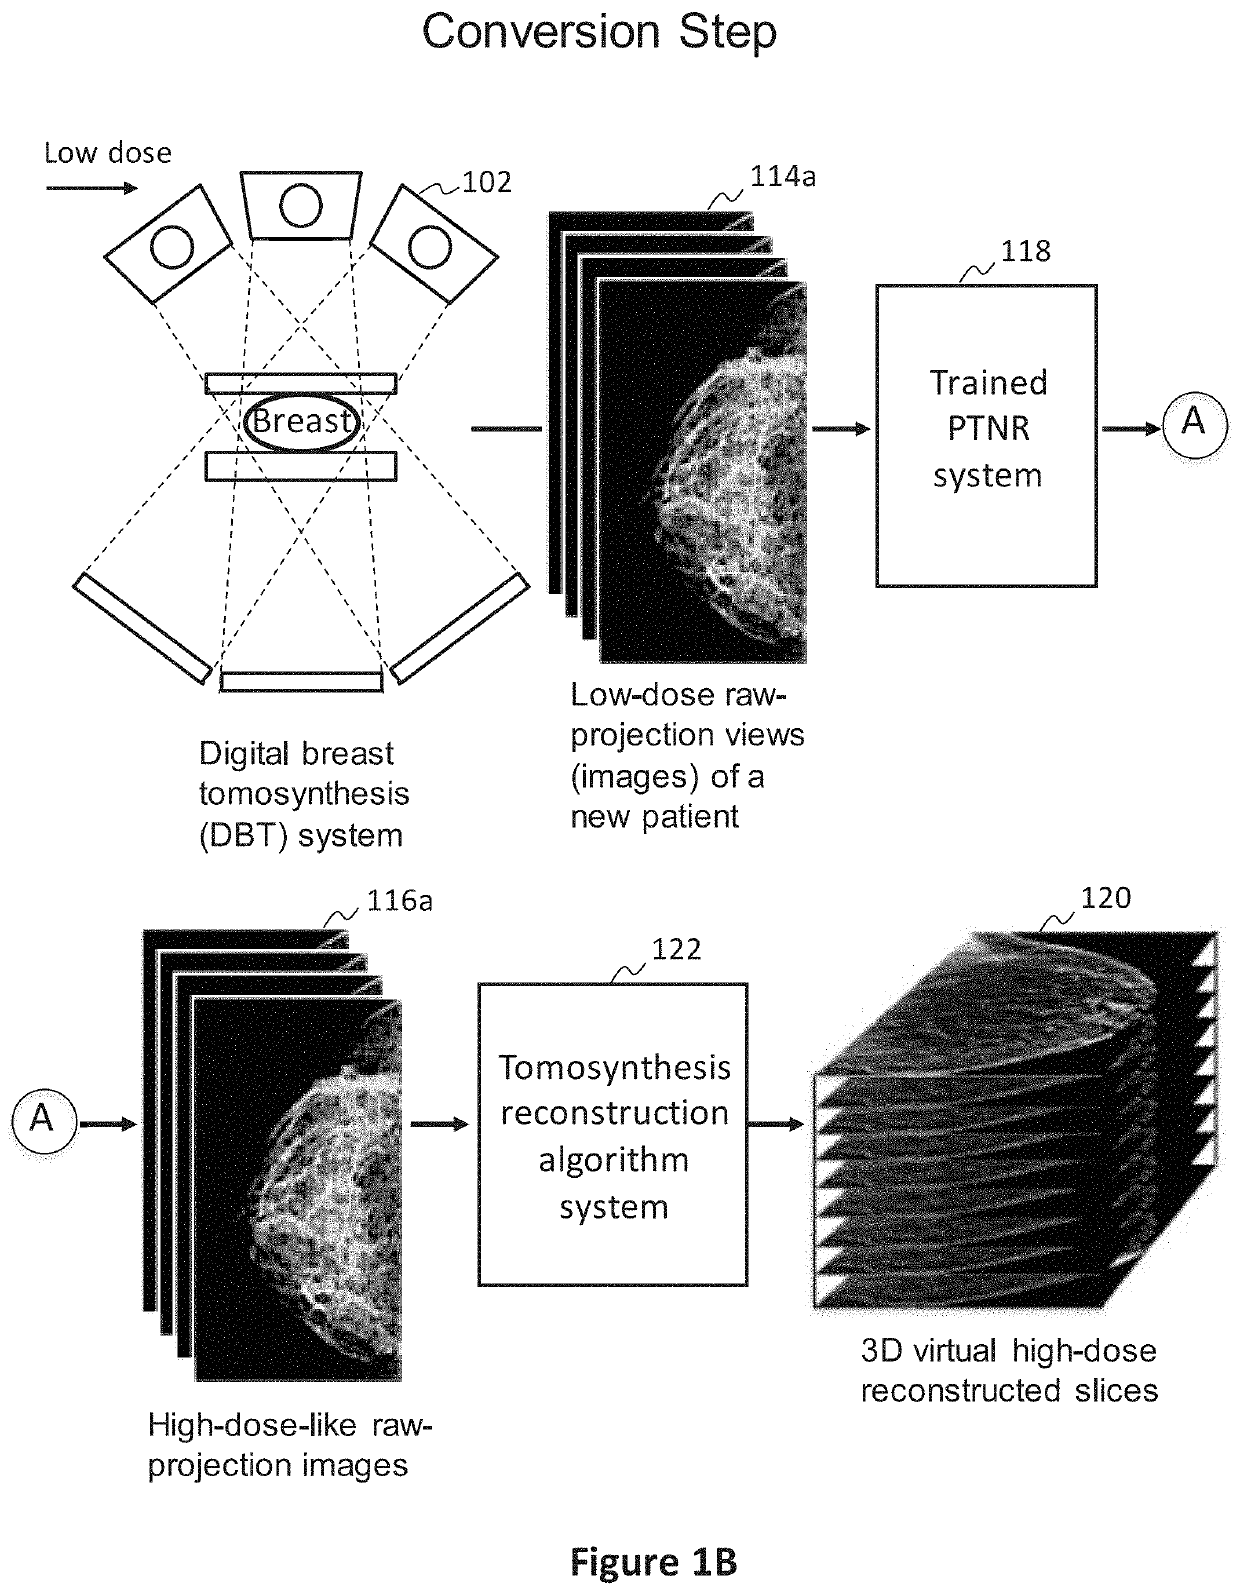 Converting low-dose to higher dose 3D tomosynthesis images through machine-learning processes